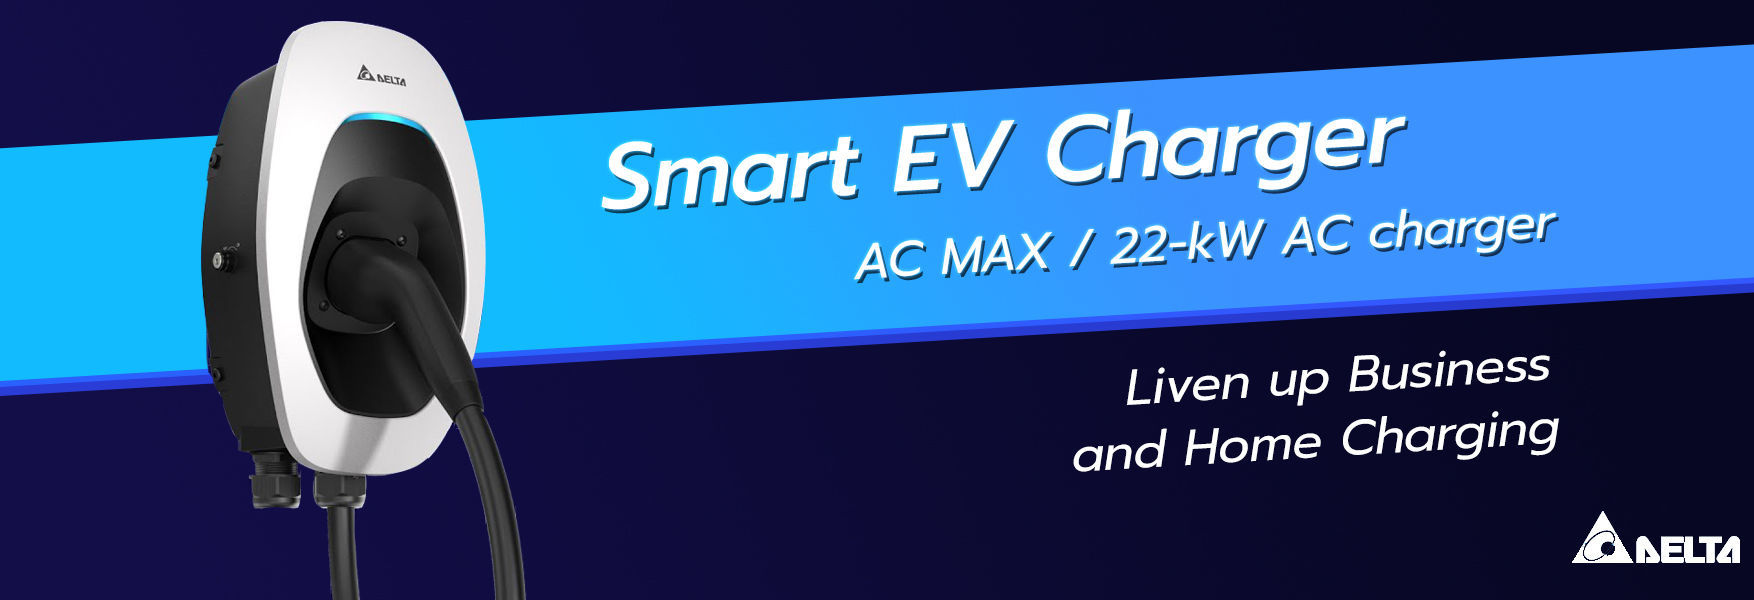 Delta Ac Max 22 kW - Ev Charger